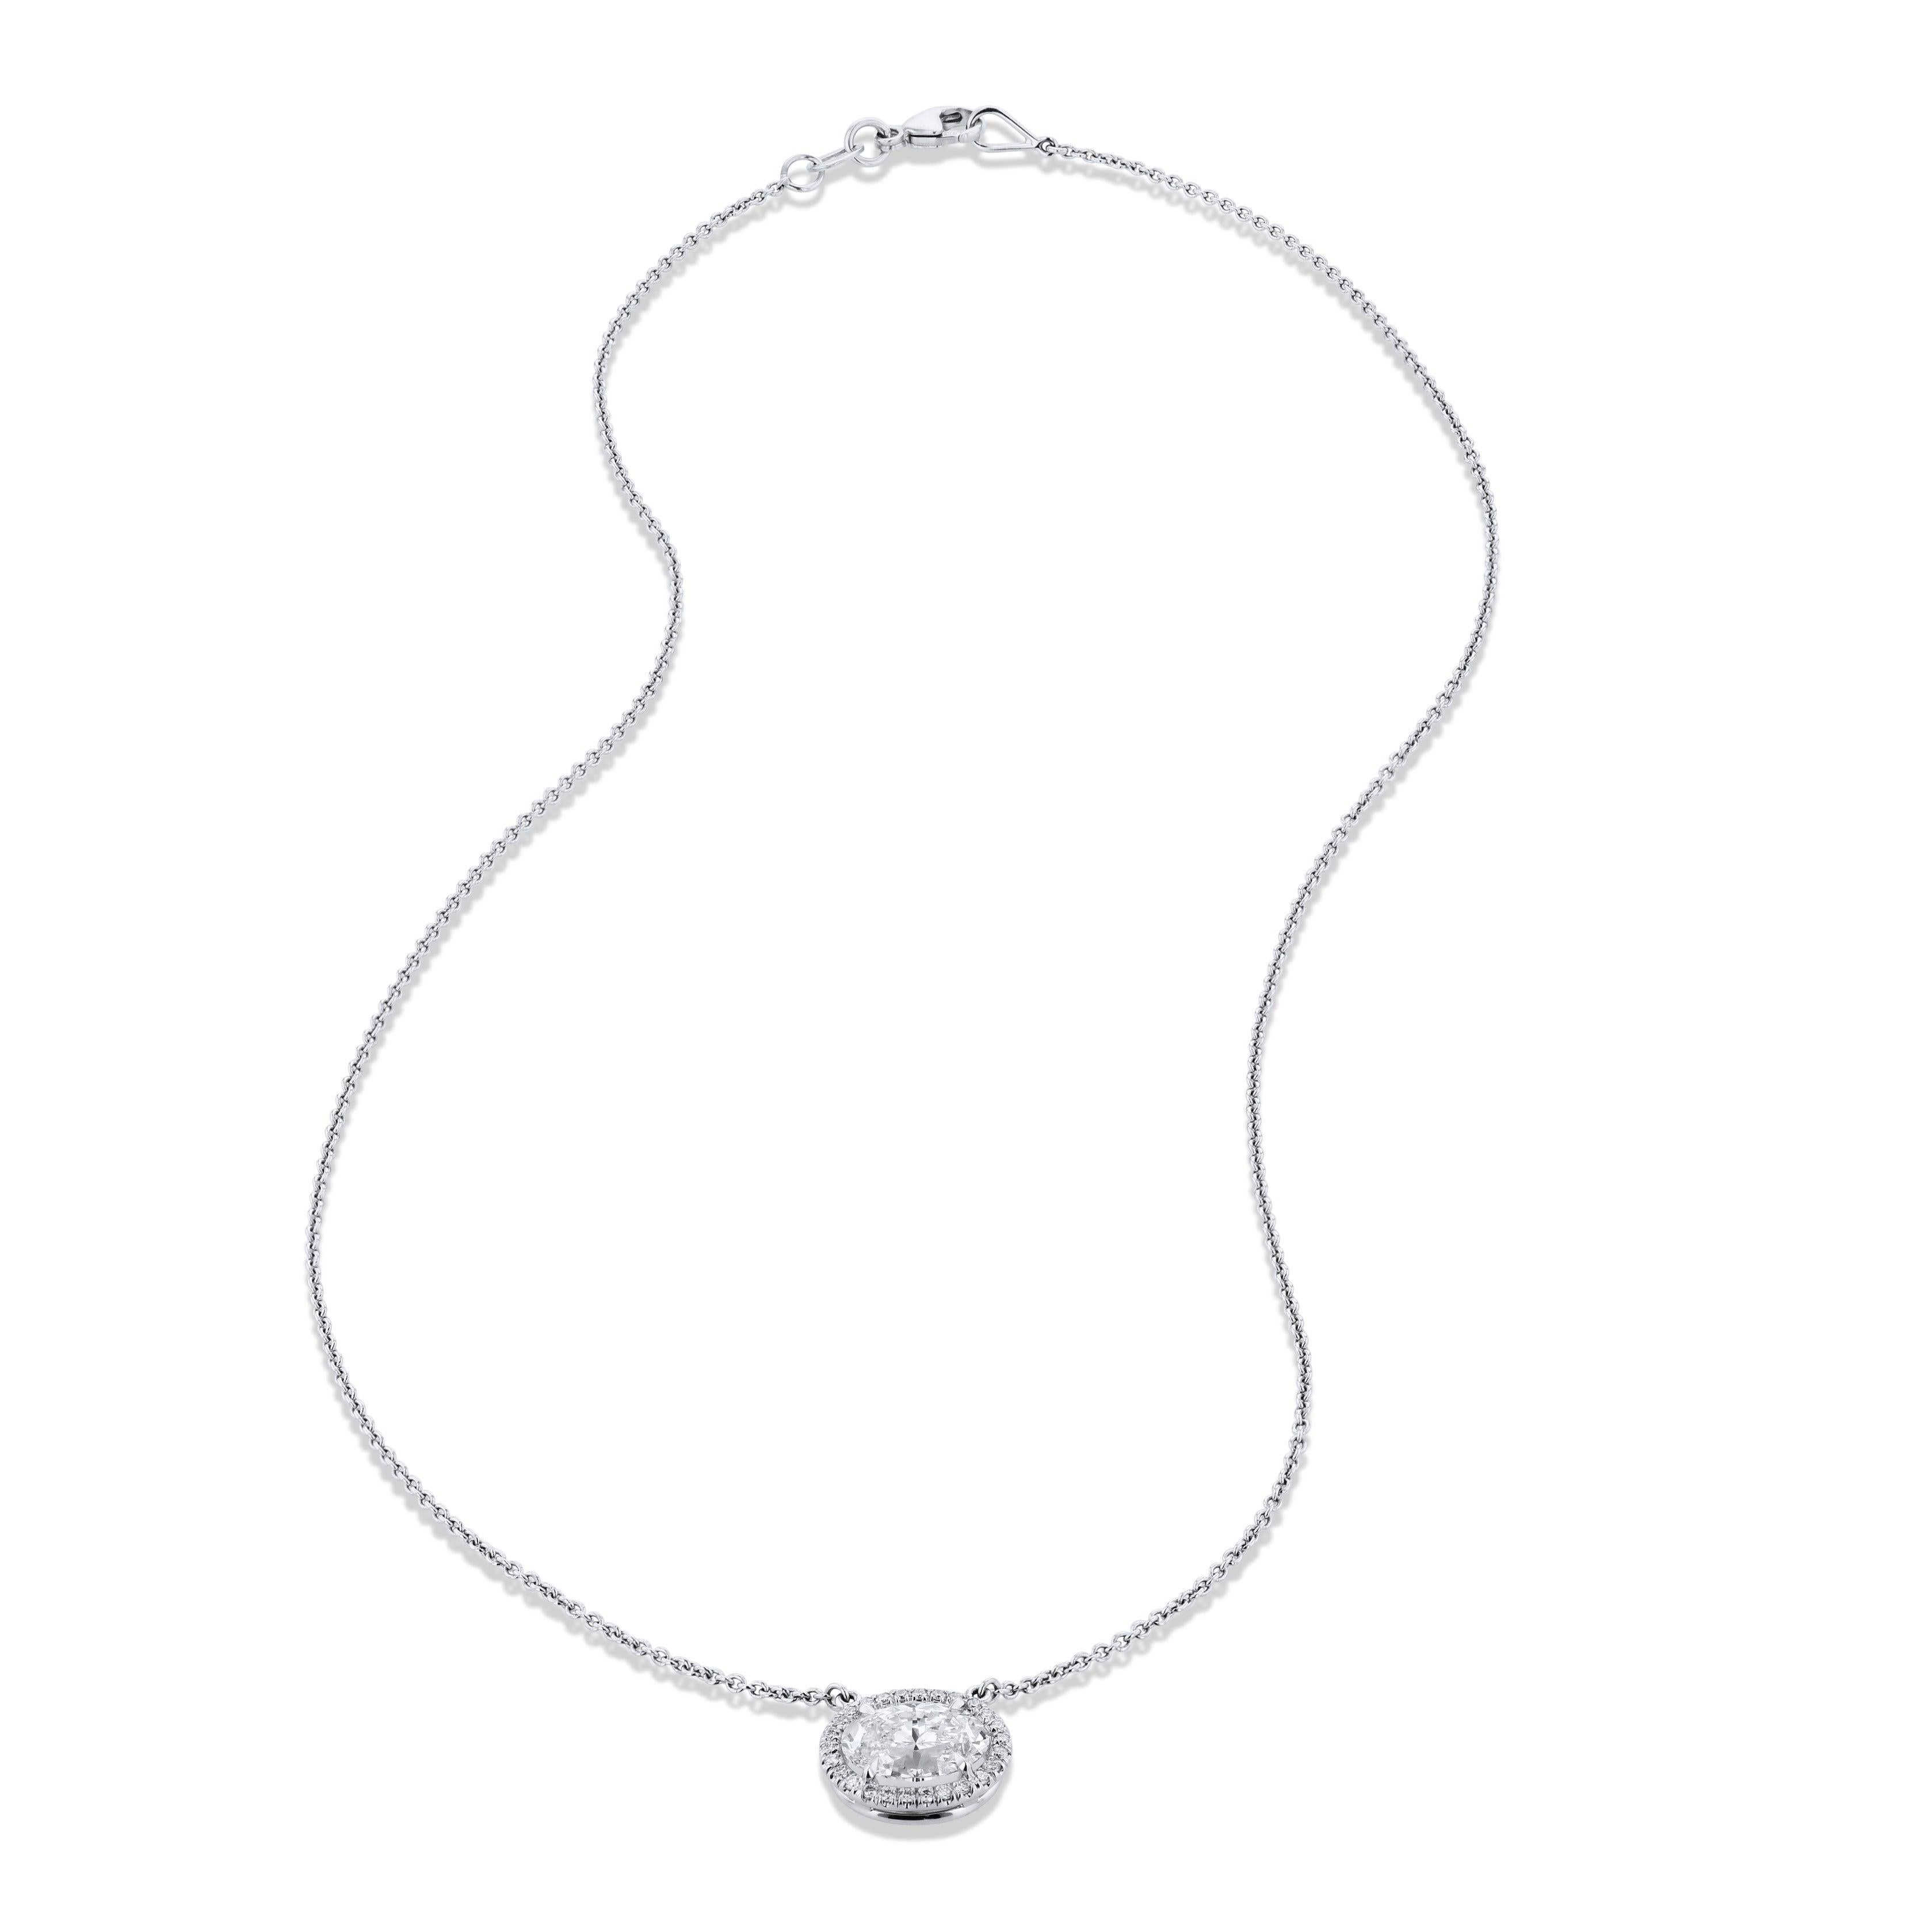 
This elegant White Gold Oval Diamond Pendant Necklace showcases a stunning 2.06 carat oval diamond.  It is I in color and VS2 in clarity. 
There are an additional 26 round pave-set diamonds totaling 0.14 G/H VS/SI1 surround the centerpiece in